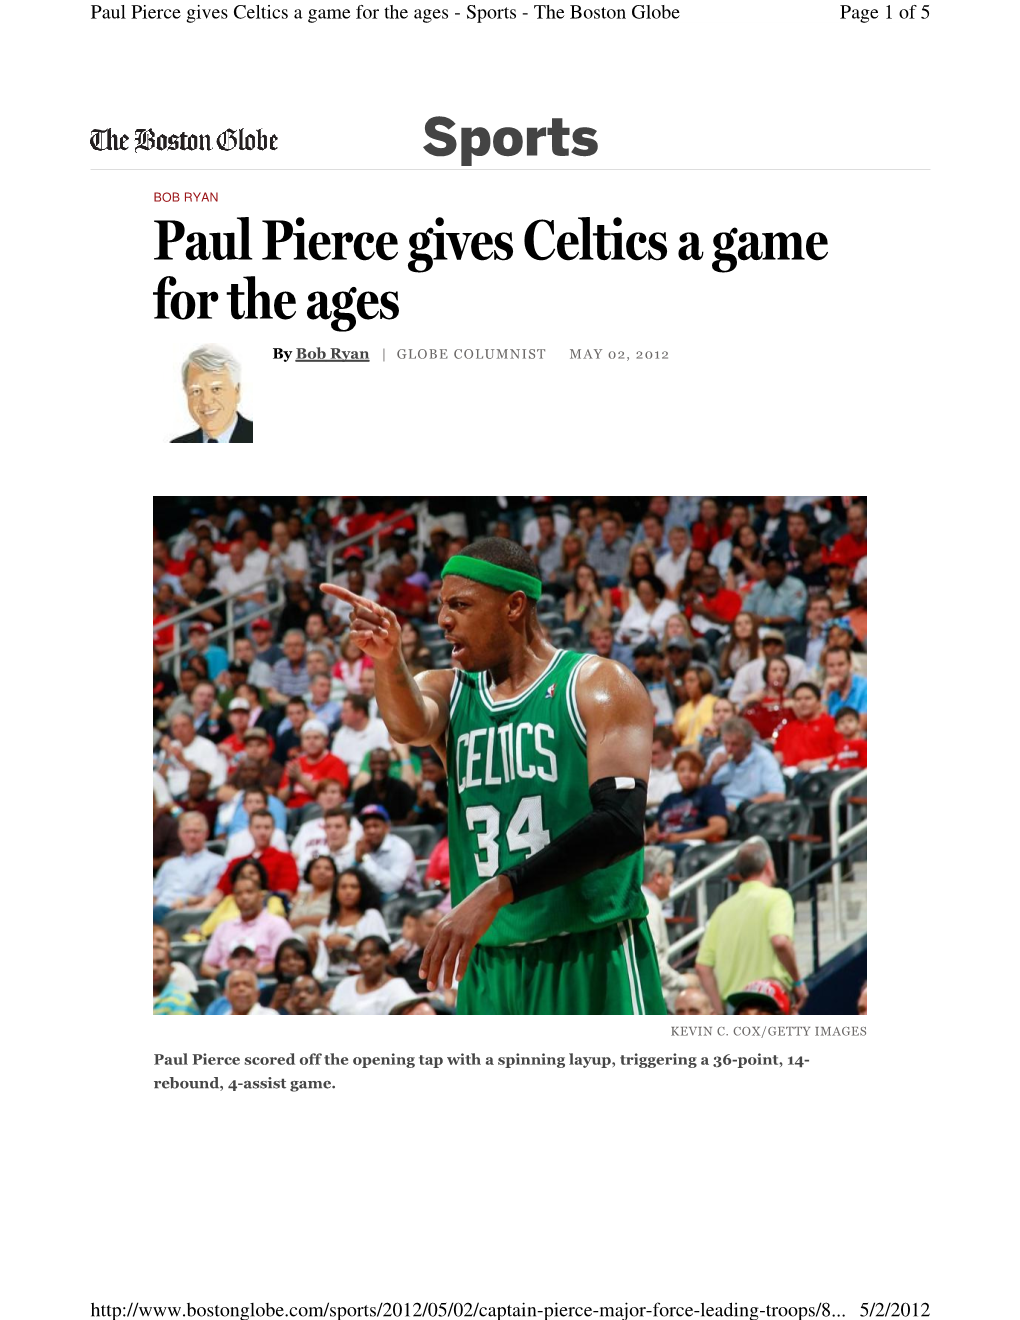 Paul Pierce Gives Celtics a Game for the Ages - Sports - the Boston Globe Page 1 of 5